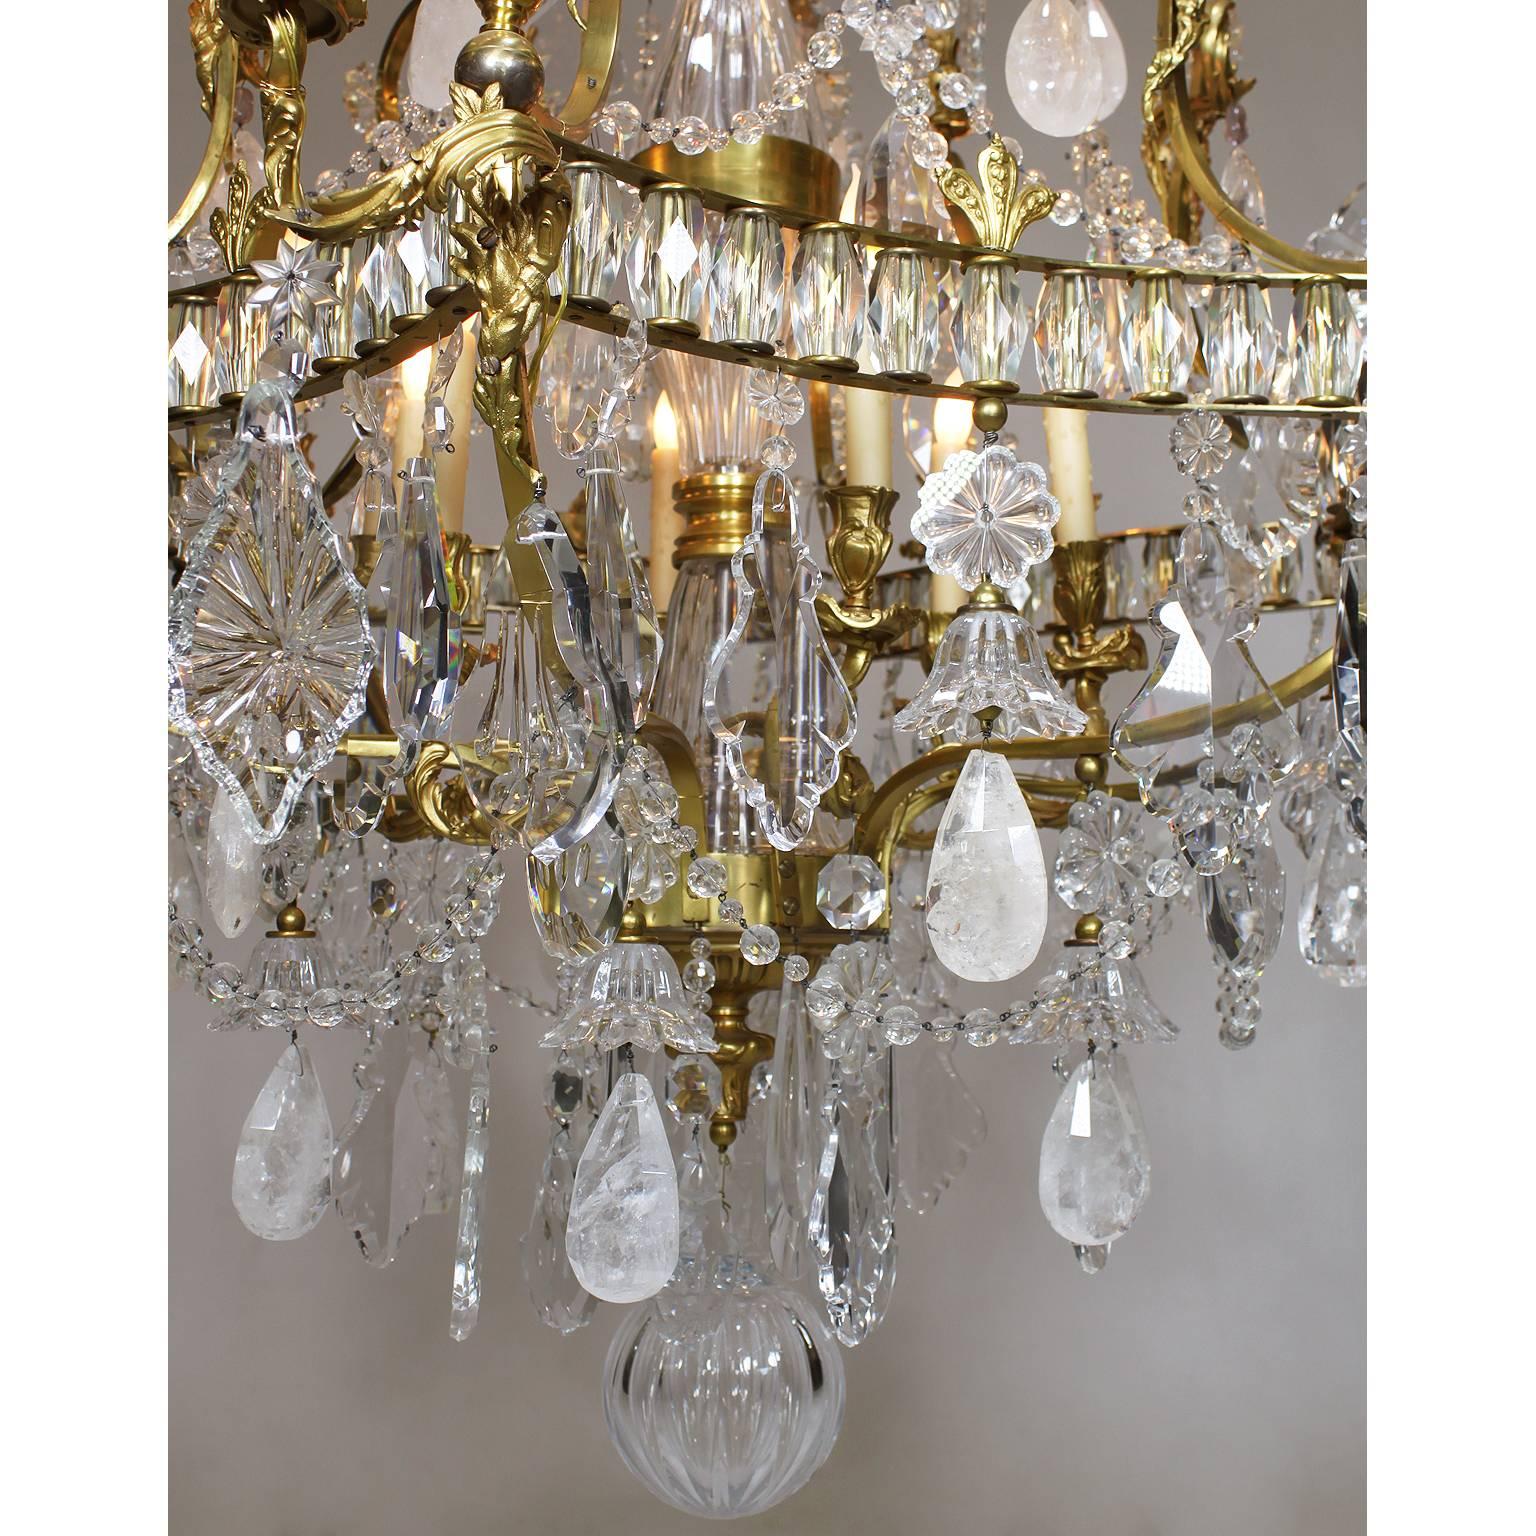 Fine French Louis XV Style Gilt-Bronze and Rock Crystal Chandelier, 20th Century In Good Condition For Sale In Los Angeles, CA